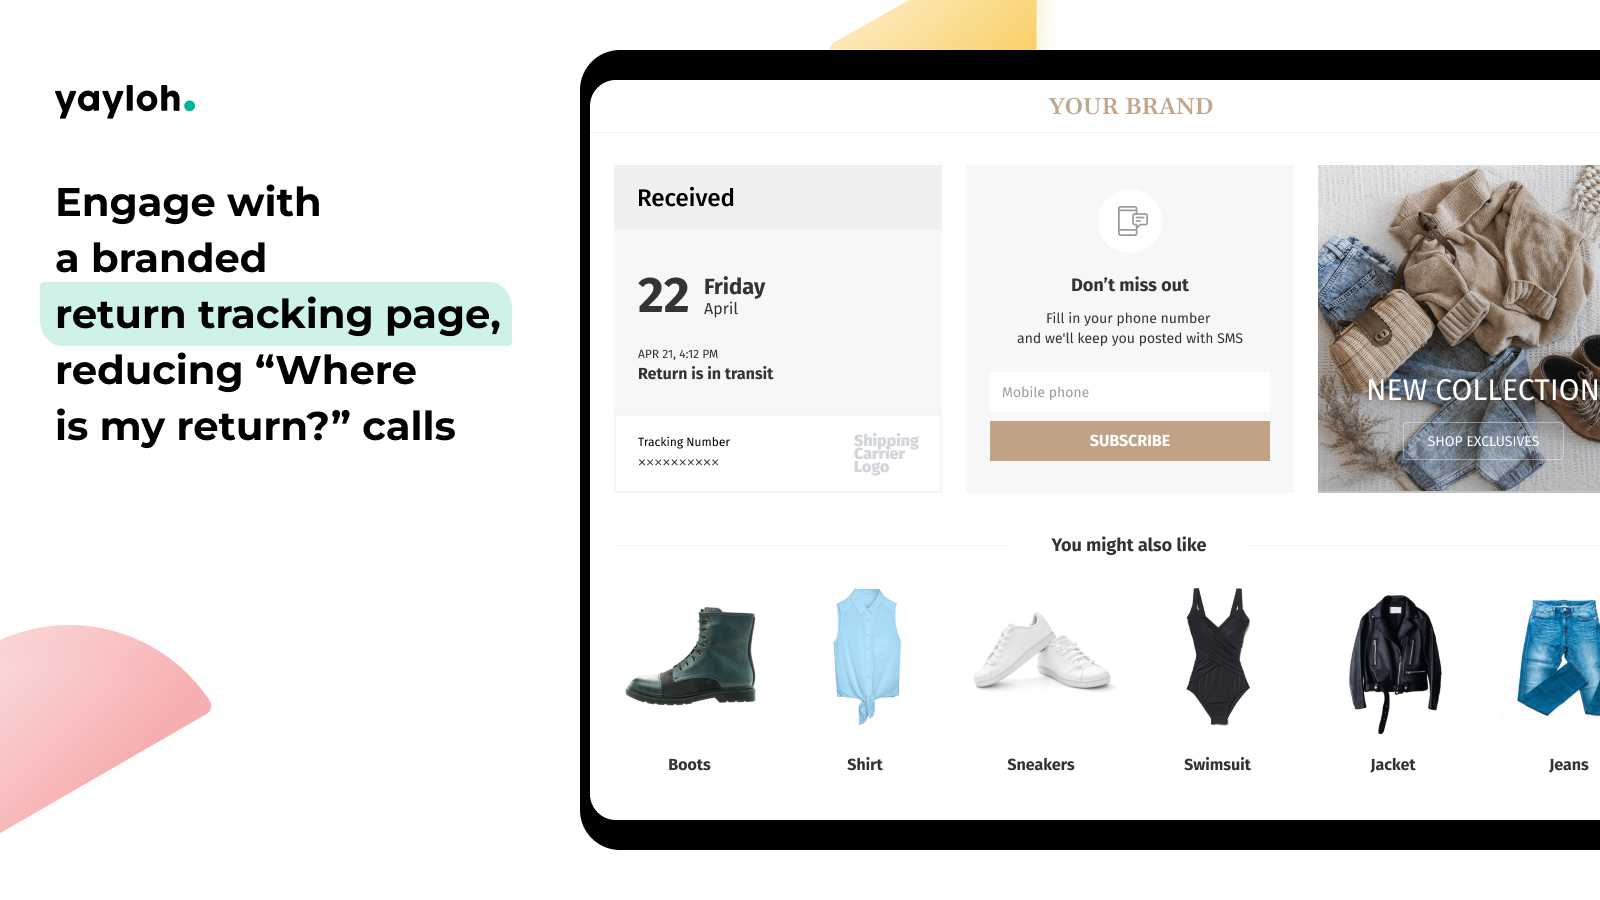 Branded return tracking page to increase loyalty